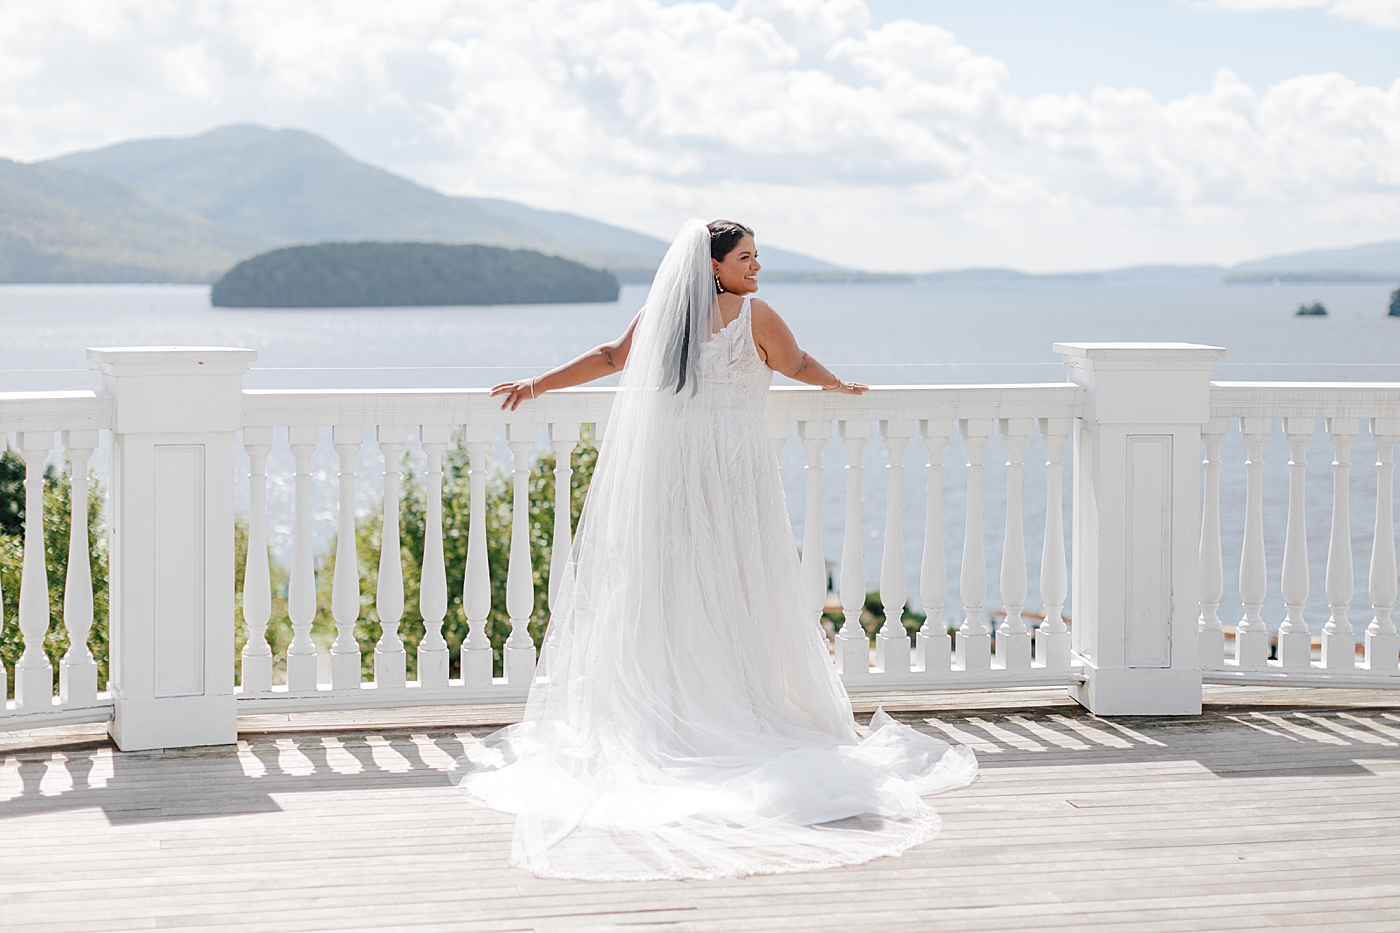 Back of dress details of a bride on a deck in full sun with white railings | Image by Hope Helmuth Photography